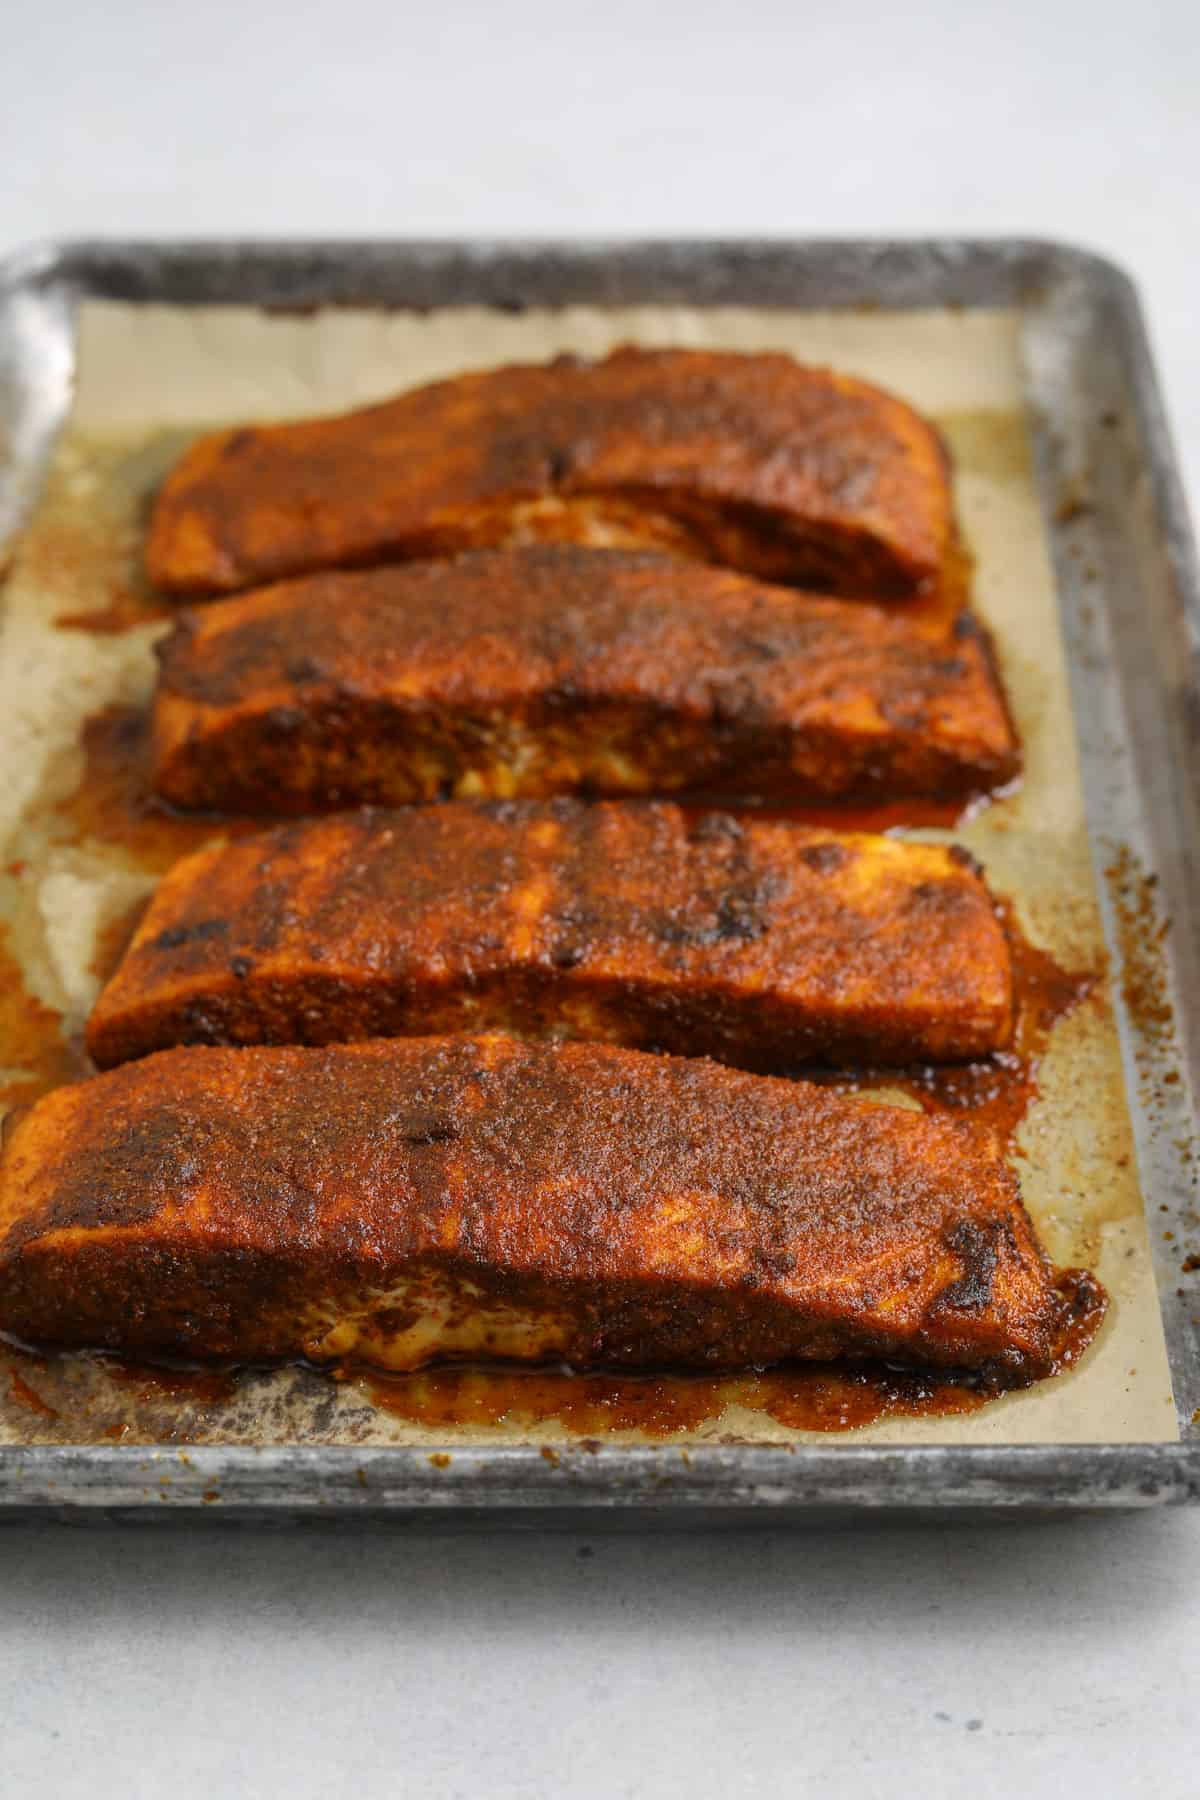 Four blackened oven-roasted bbq salmon filets on a parchment lined baking tray.